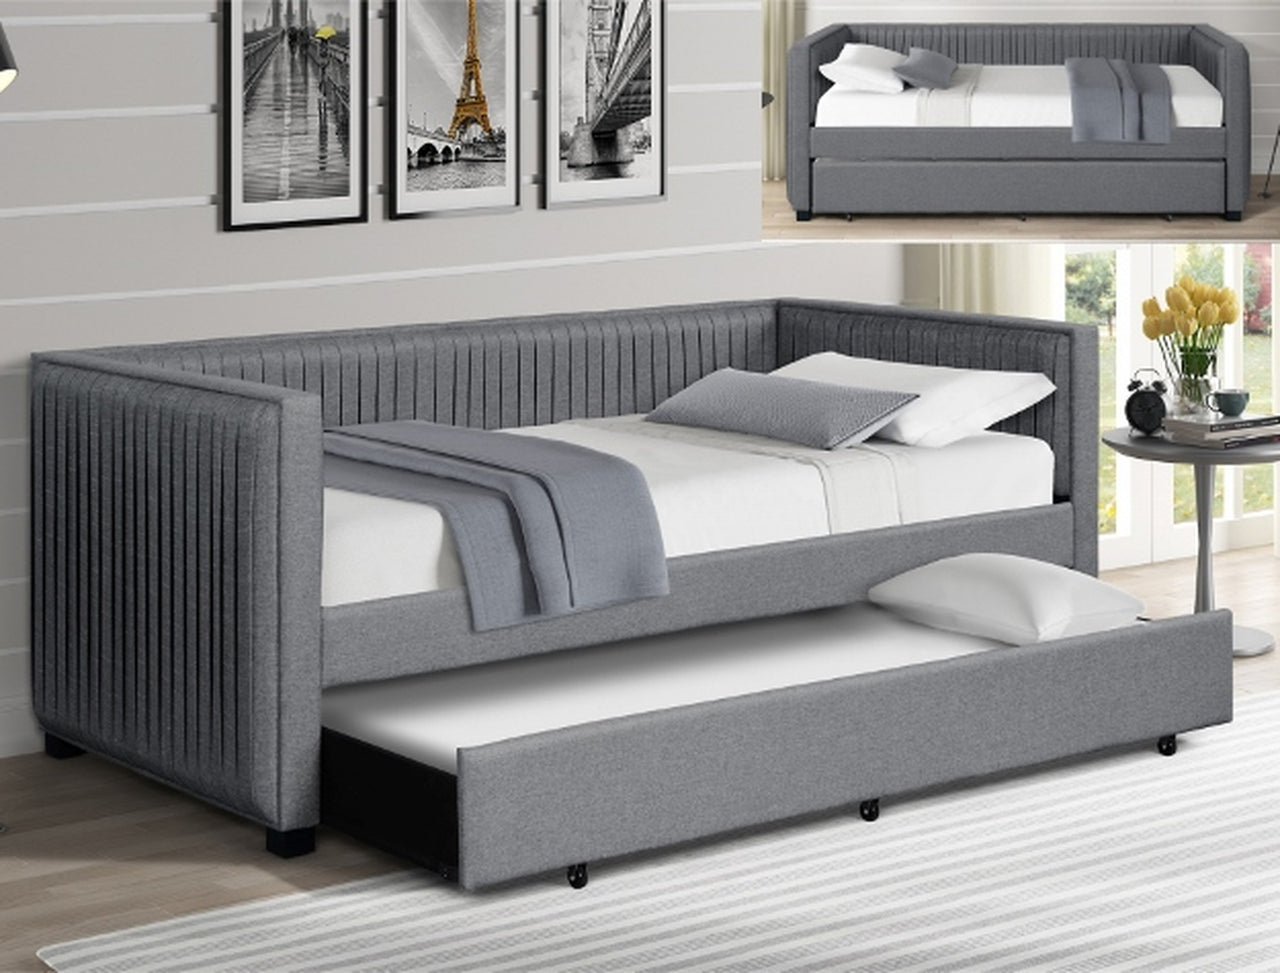 5338 GY-SET DAYBED EMERY GRIS 